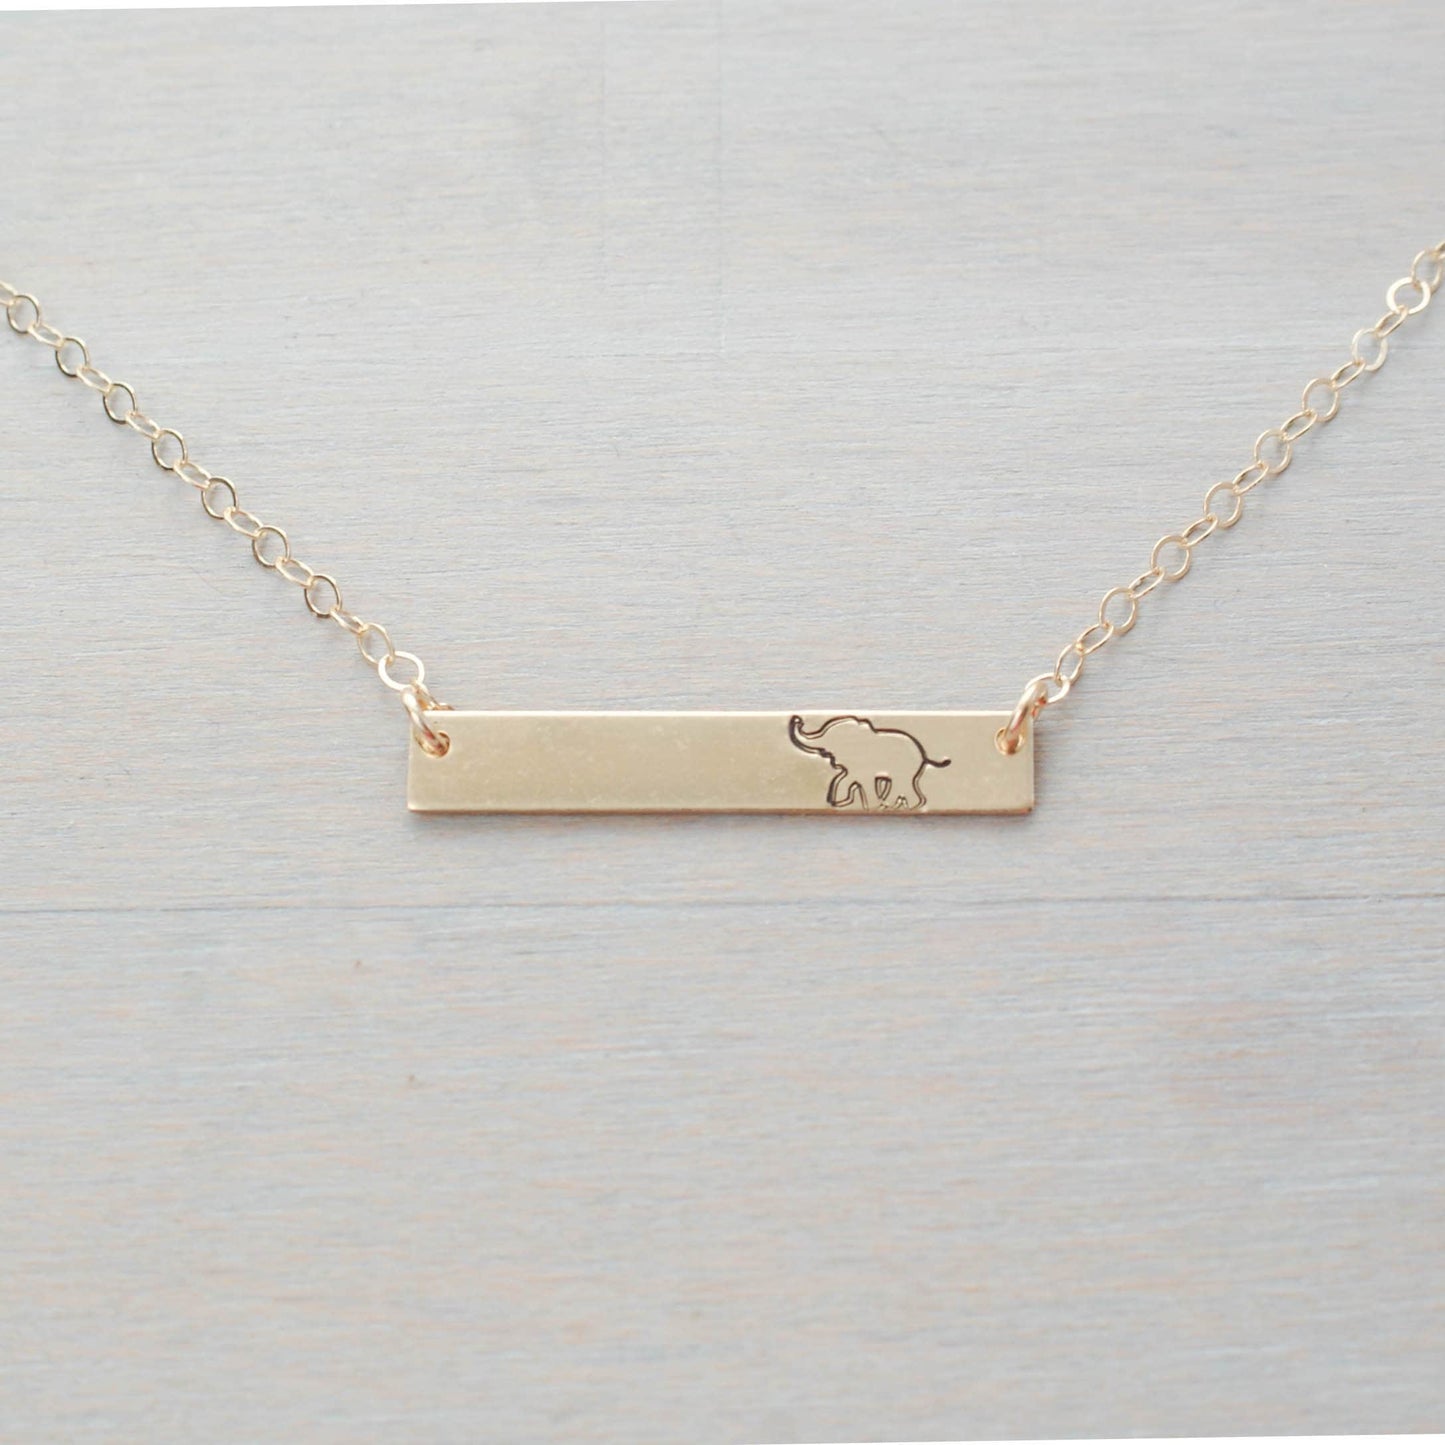 Gold bar neckalce stamped with elephant